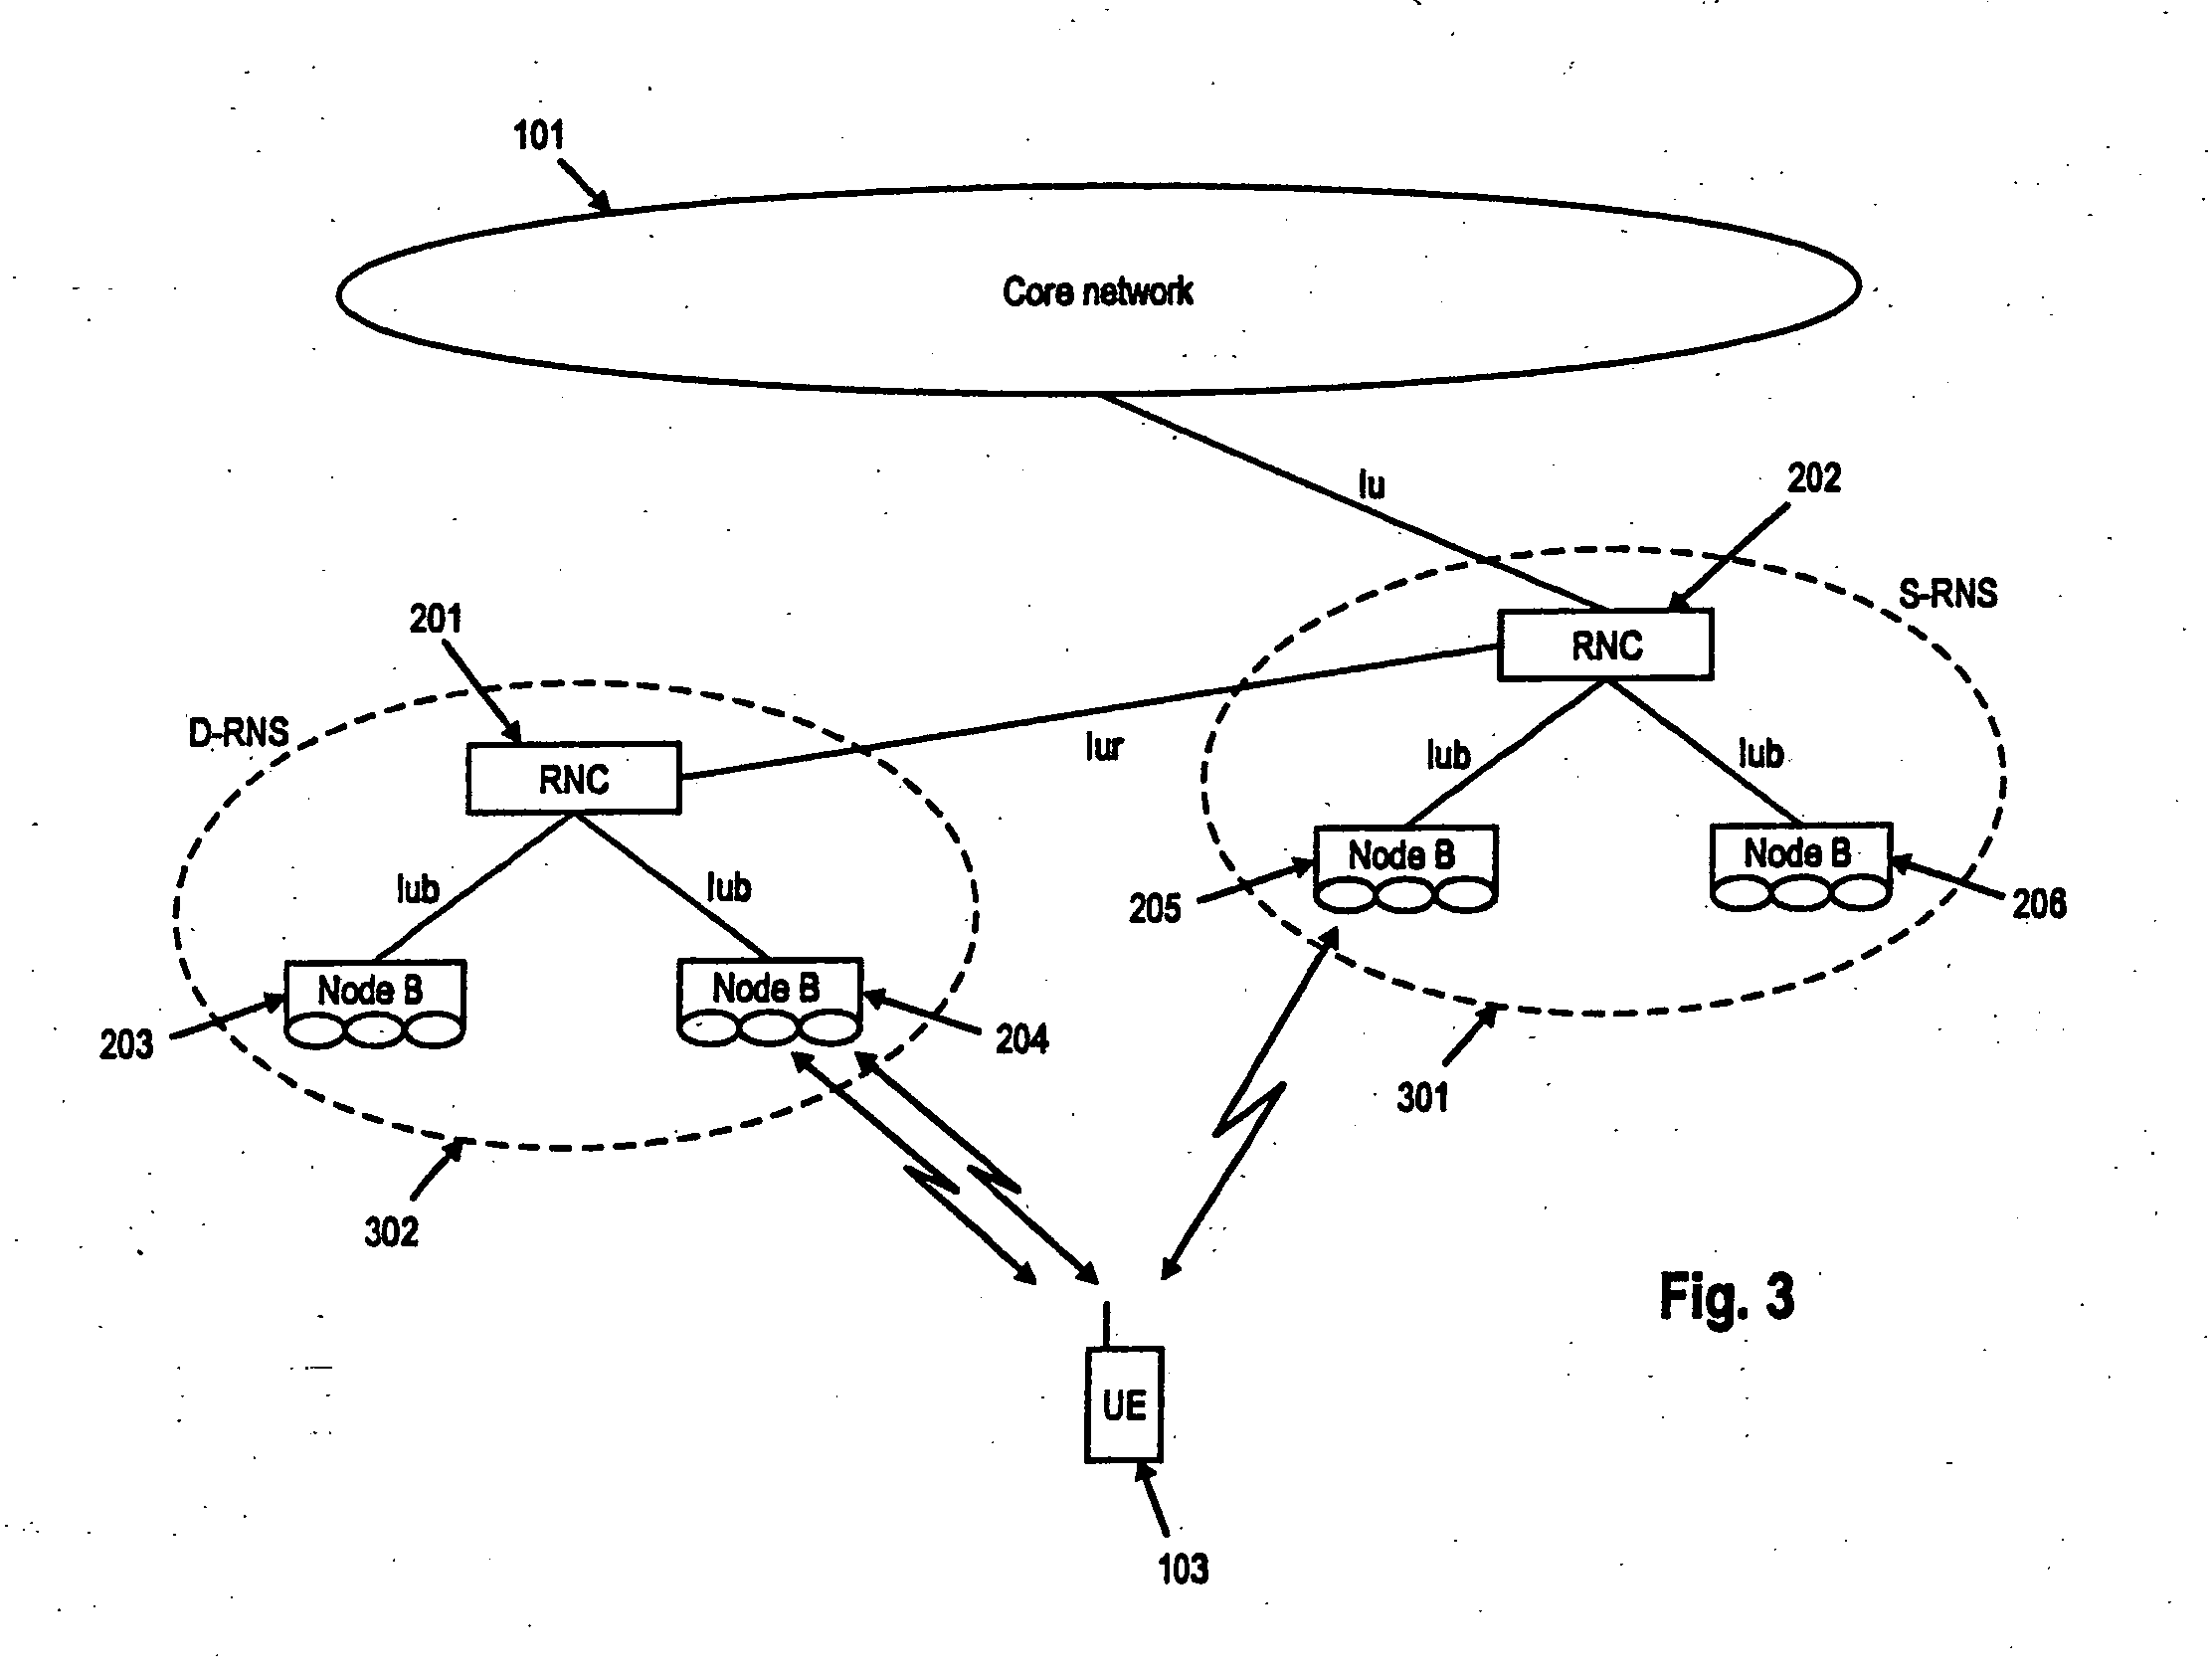 MAC layer reconfiguration in a mobile communication system